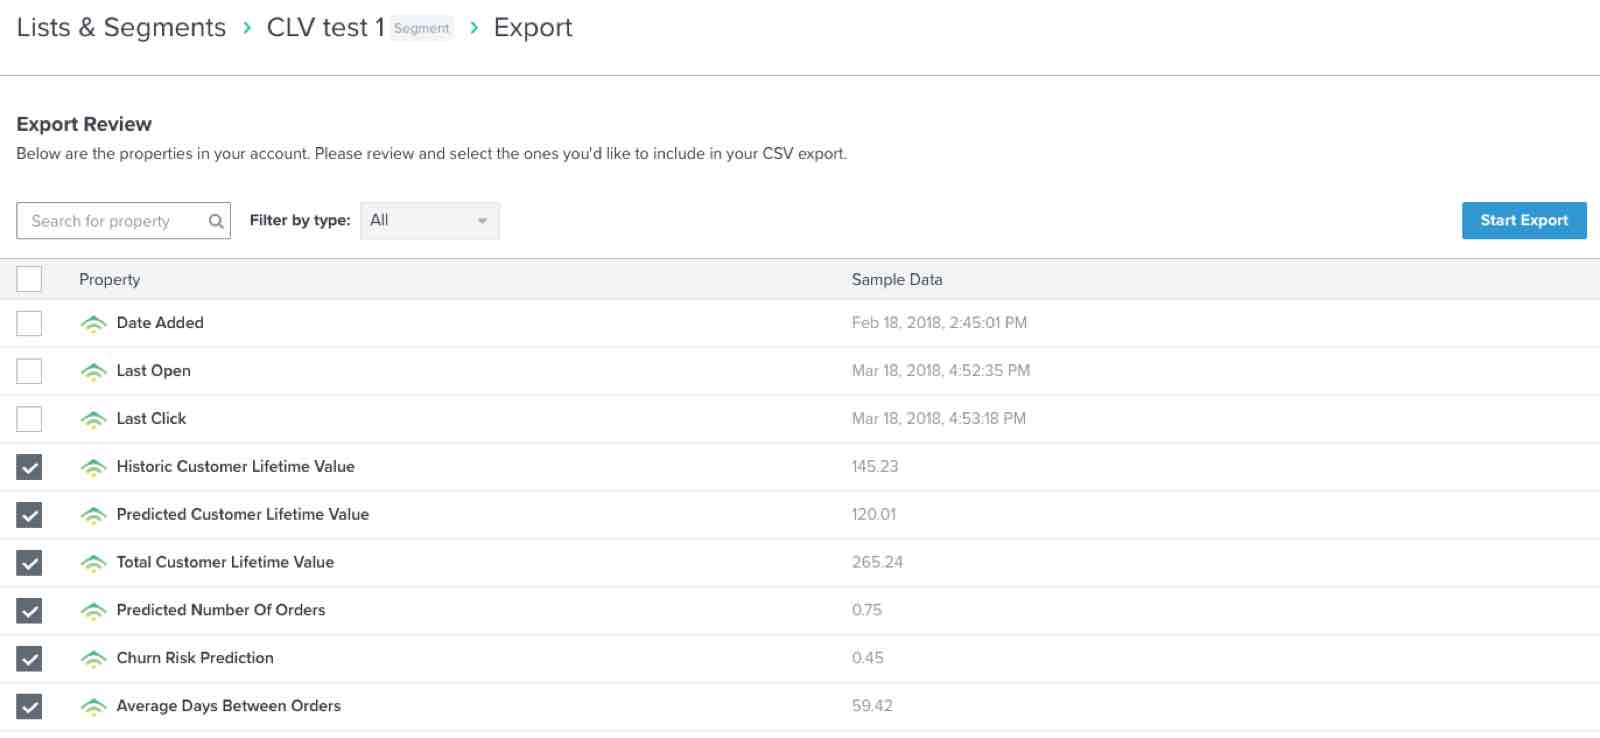 The export page for a CLV segment